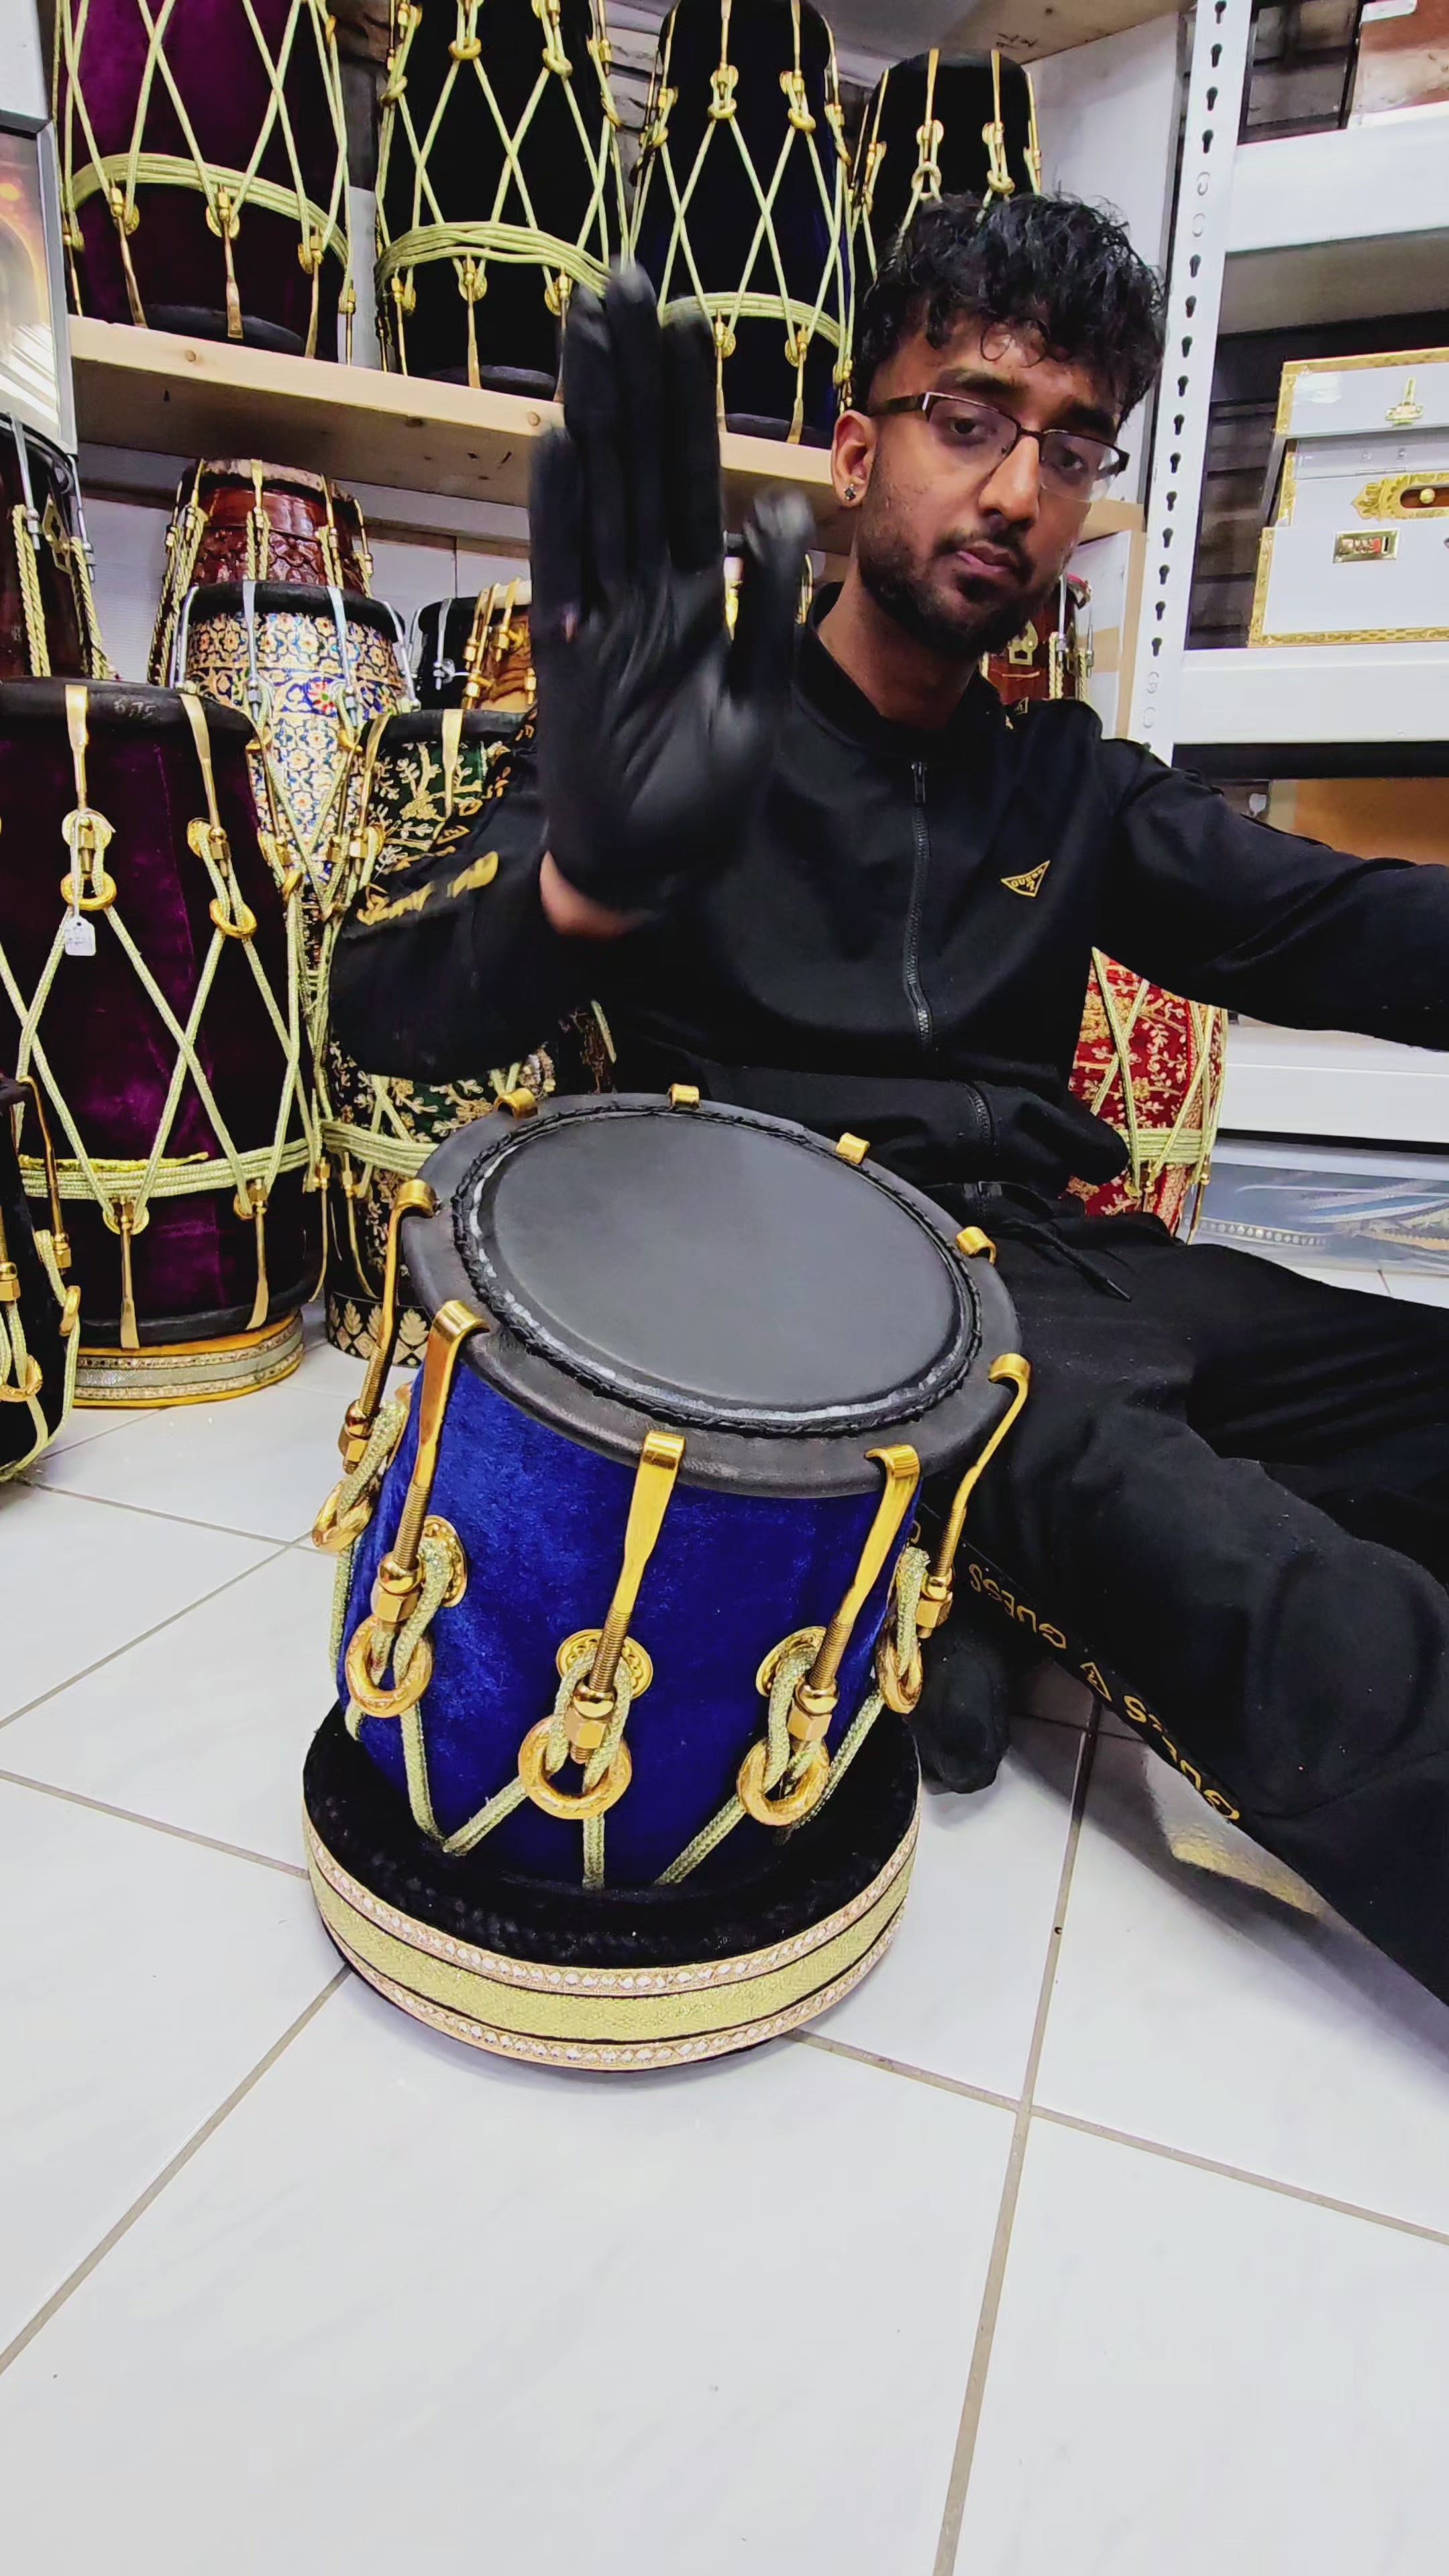 Sapphire Serenade: 6.25" Red Sheesham Half-Dholak with Blue Velvet Wrap, Golden Brass Accents, Ropes Design, and Ebony Black Skin *Minor Skin Discolouration*